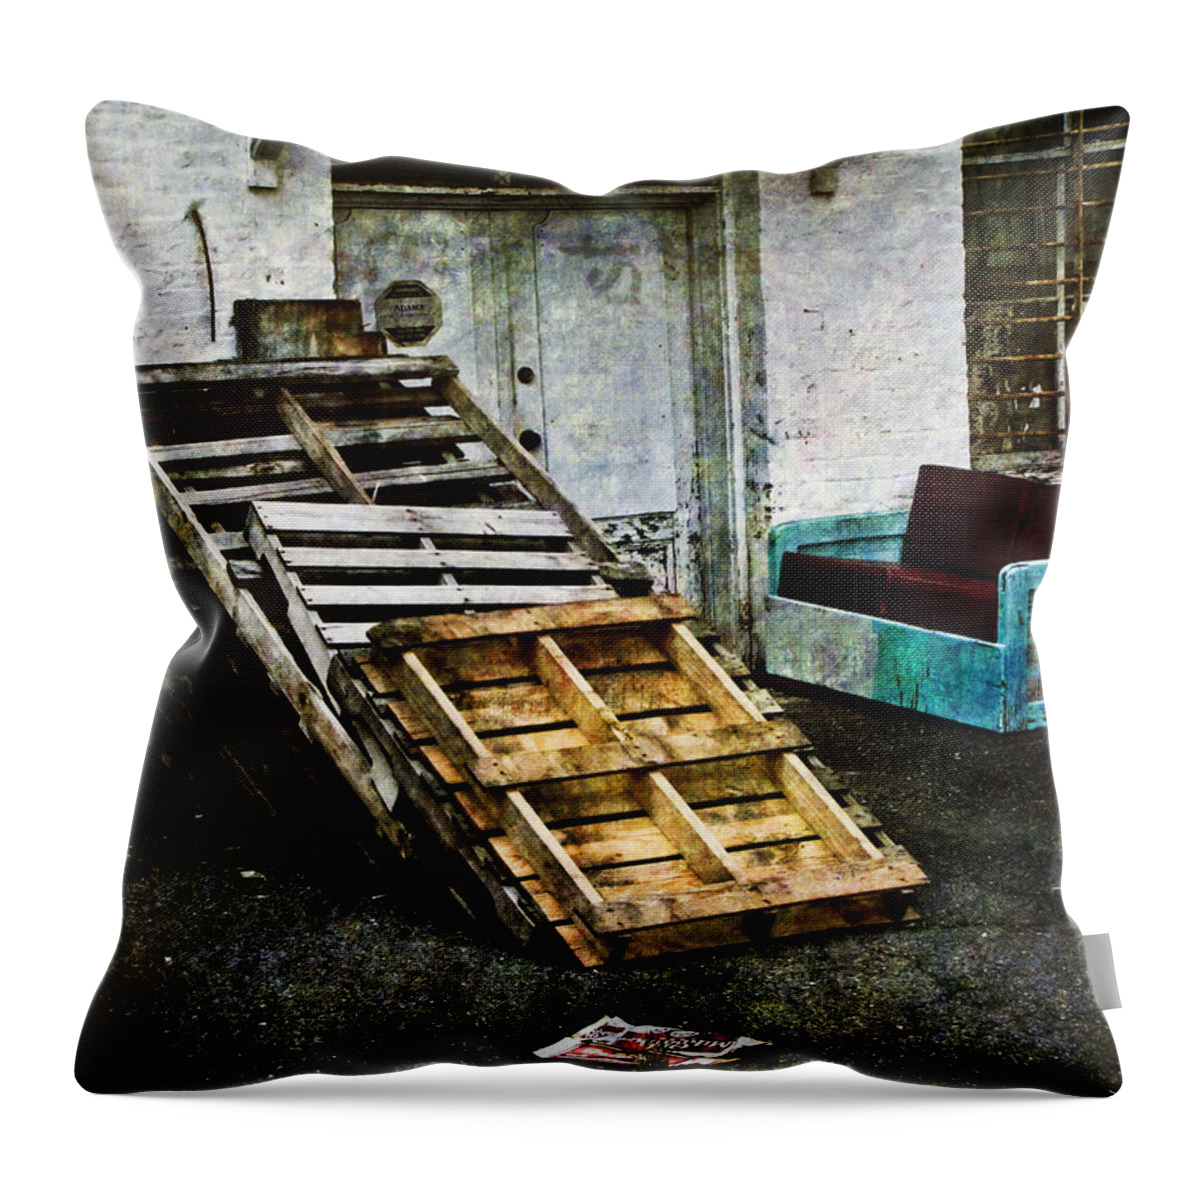 Urban Throw Pillow featuring the photograph Urban Luxury by Jessica Brawley